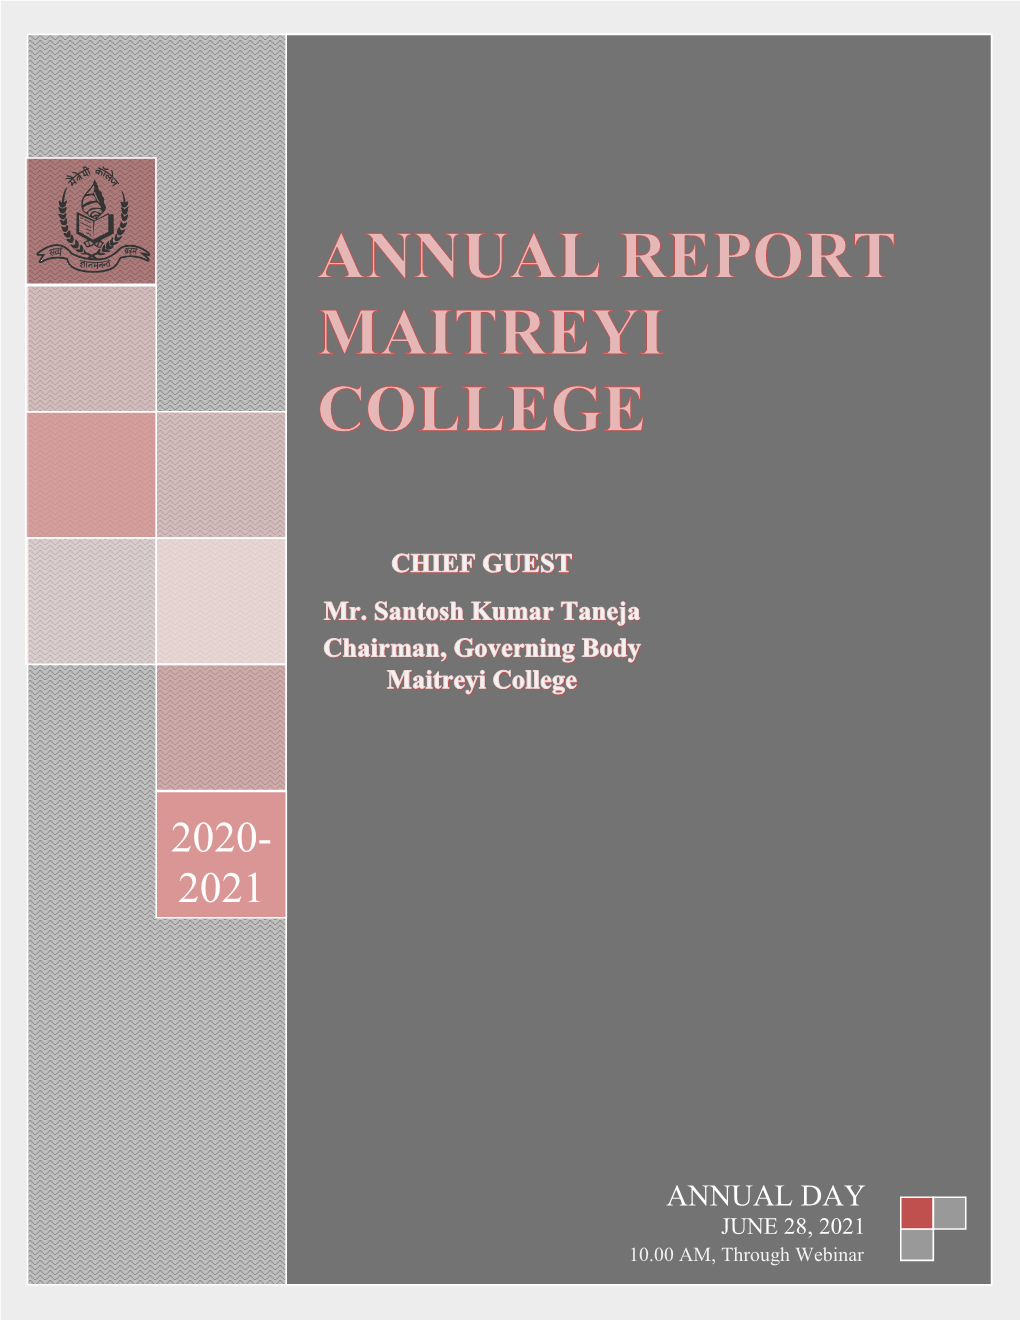 Annual Report Maitreyi College]